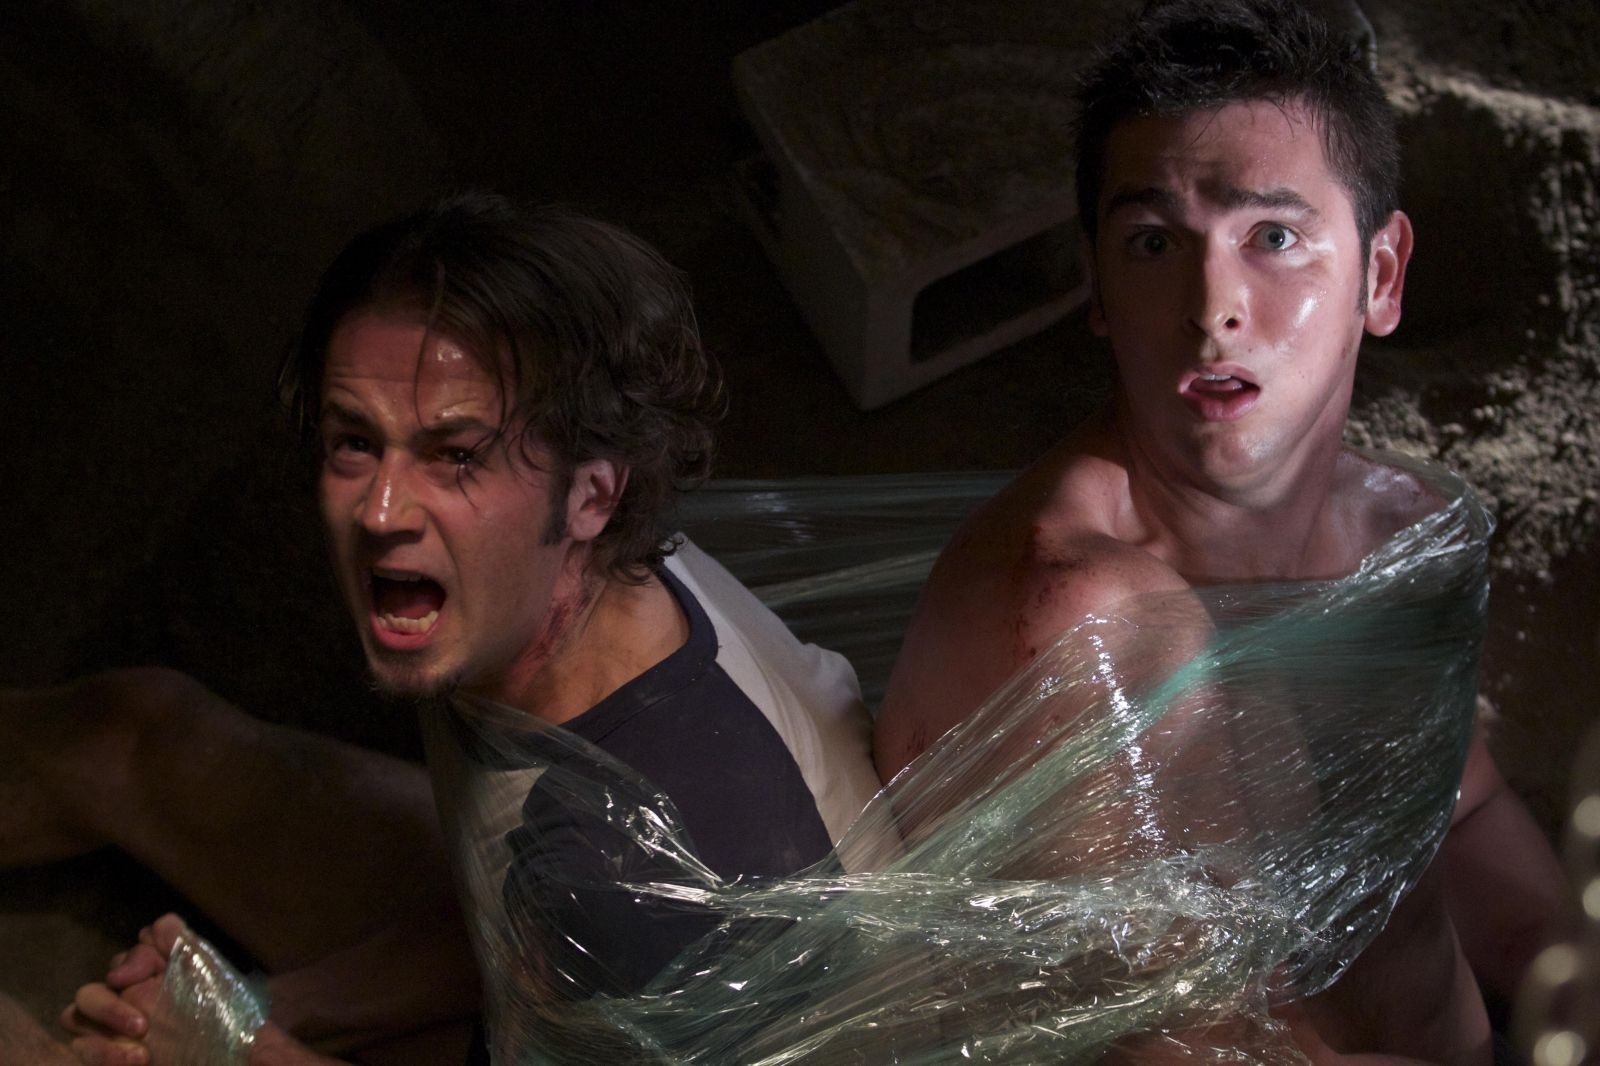 Michael Angarano stars as Travis and Nicholas Braun stars as Billy-Ray in Smodcast Pictures' Red State (2011)